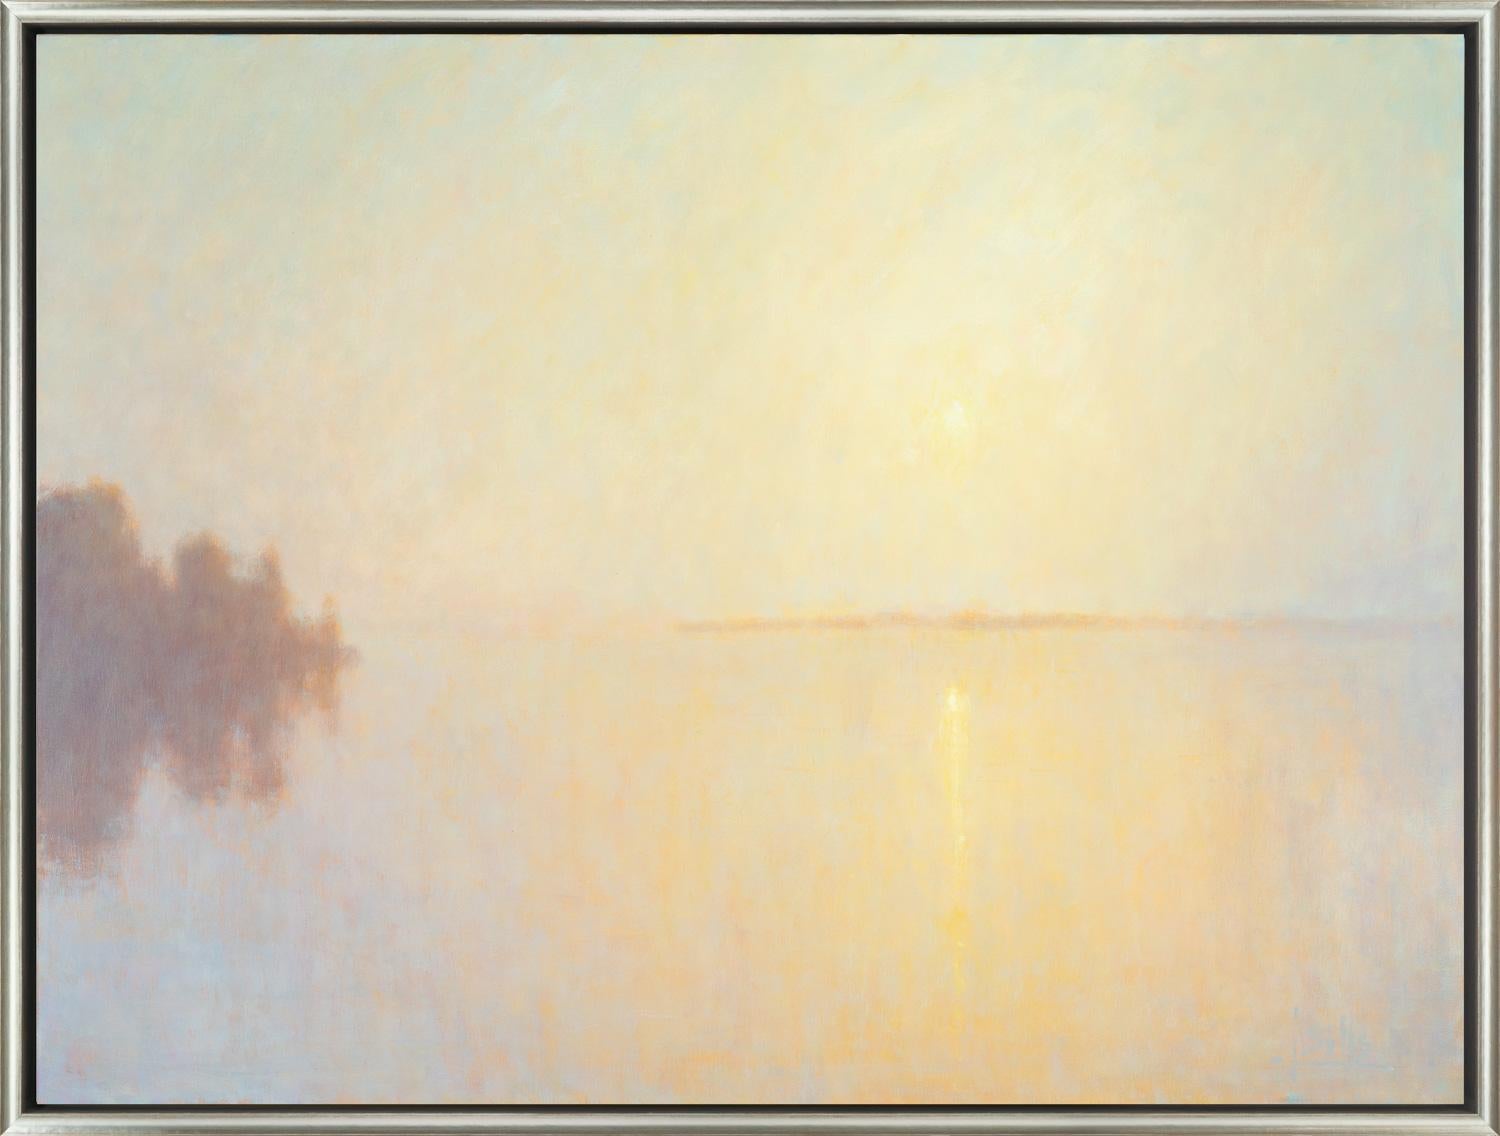 John Sills Landscape Painting - "Morning Glow" Contemporary Landscape Waterscape Framed Oil on Canvas Painting